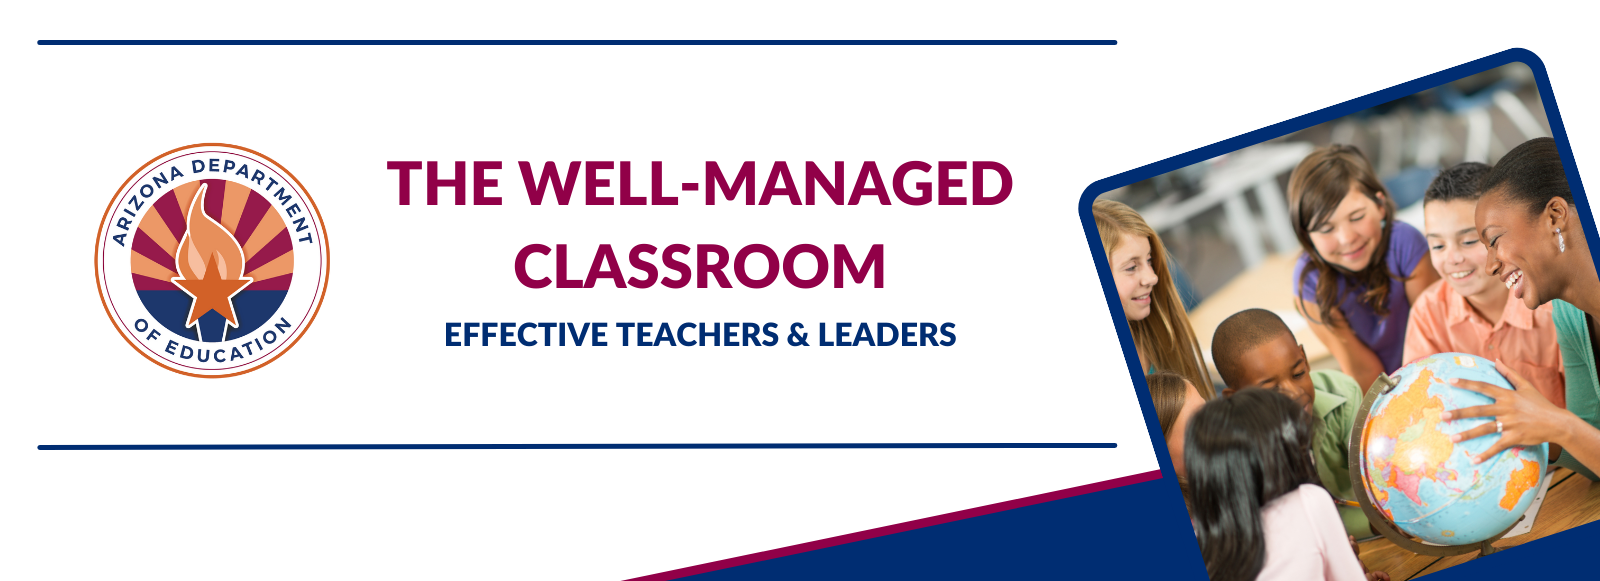 Website Banner for The Well-Managed Classroom